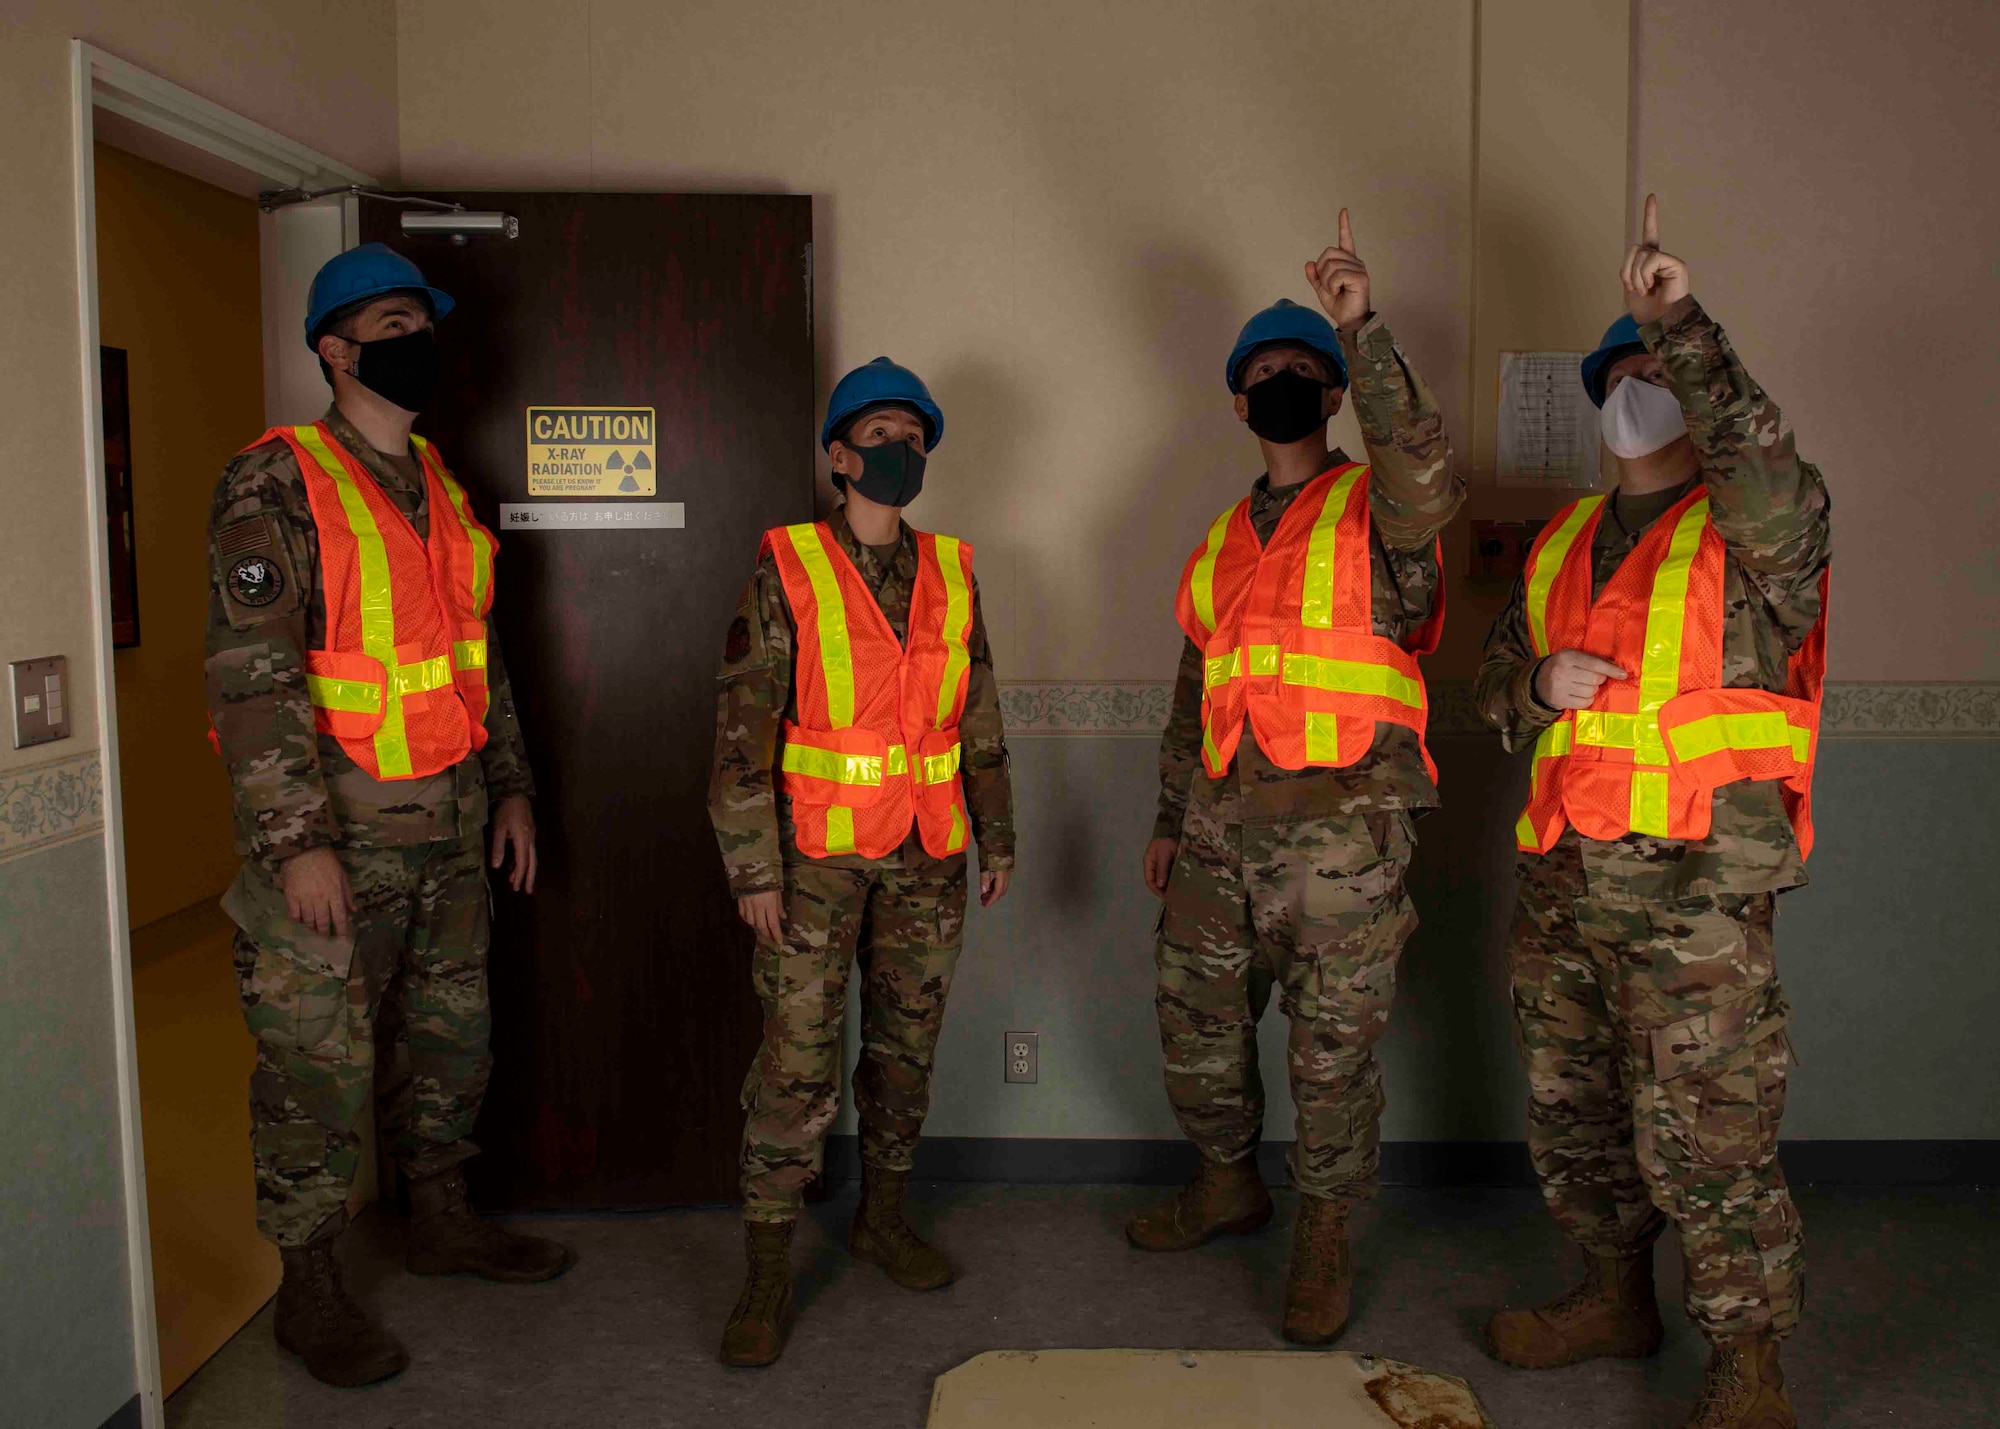 Lt. Col. Lisa Guzman, 374th Medical Support Squadron commander, left middle, inspects a computerized tomography room at Yokota Air Base, Japan, Oct. 8, 2021.